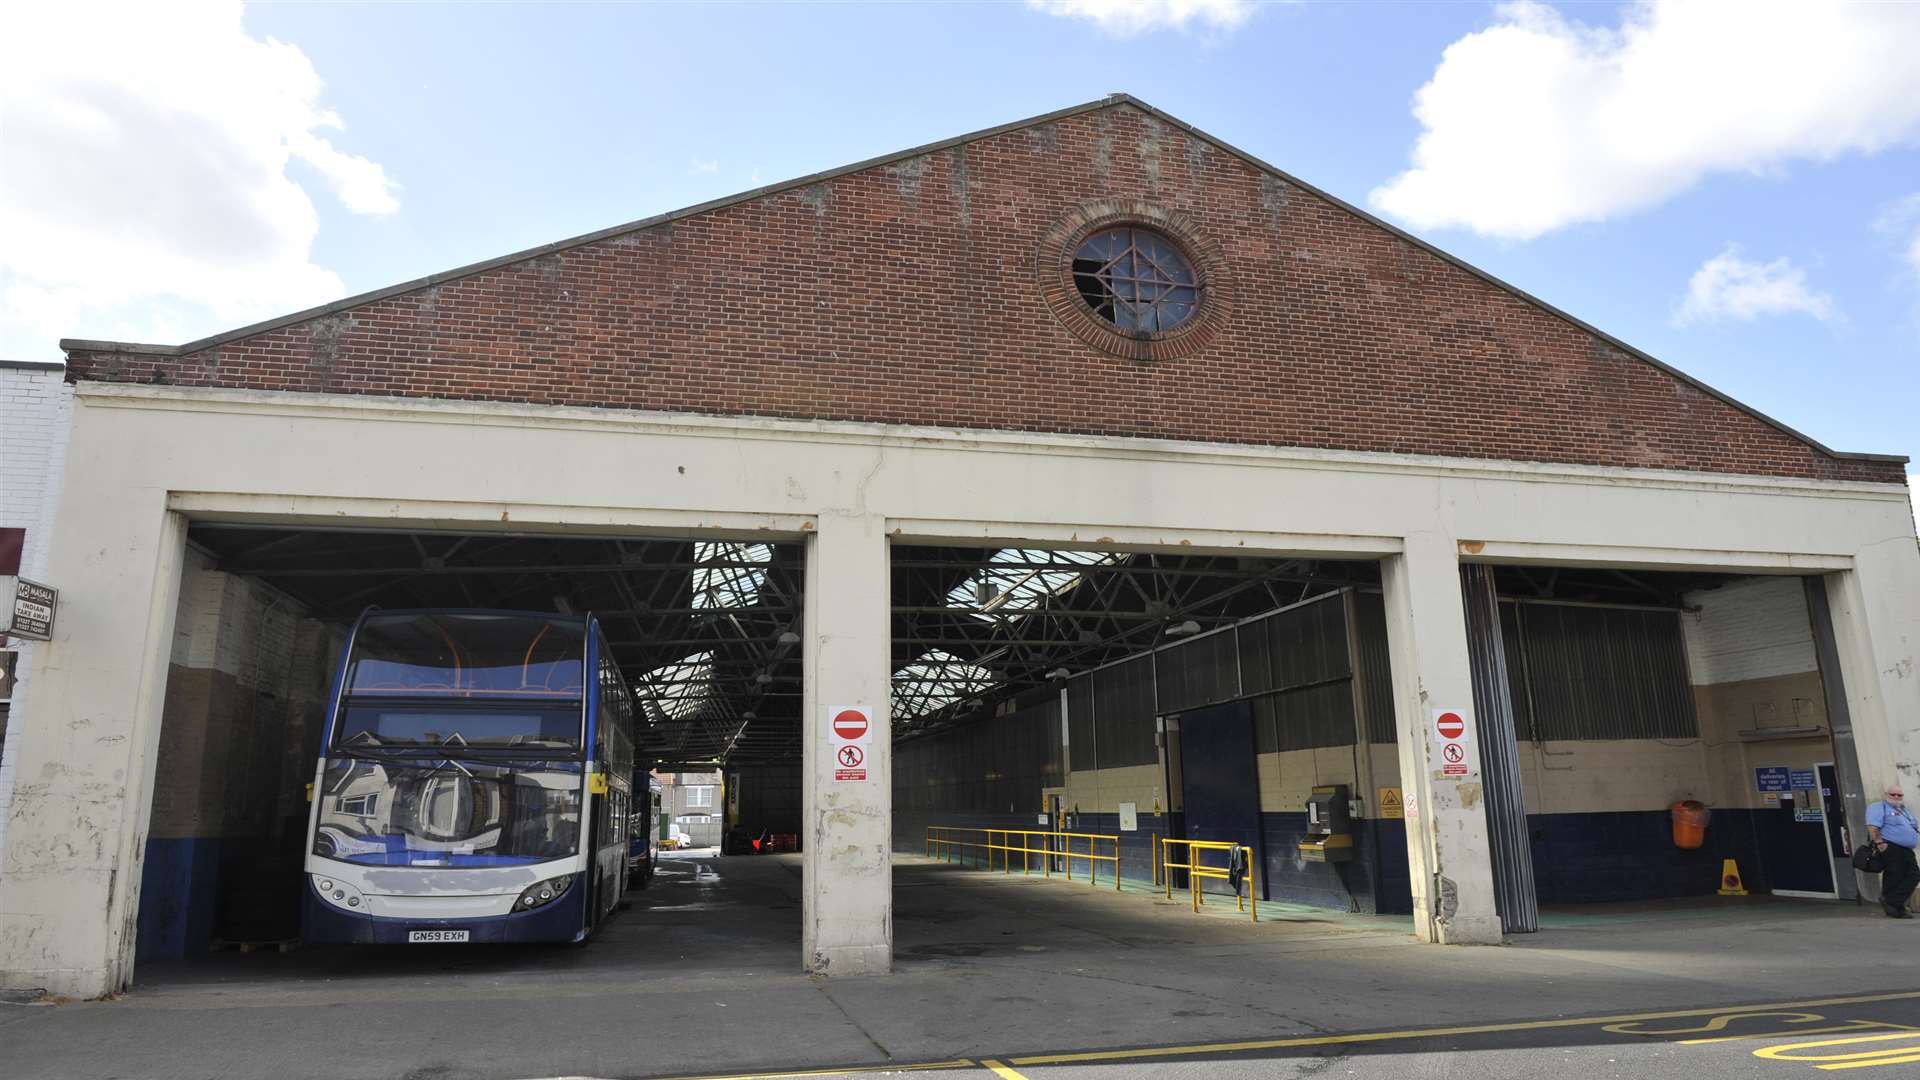 The bus depot has been in the High Street since 1916